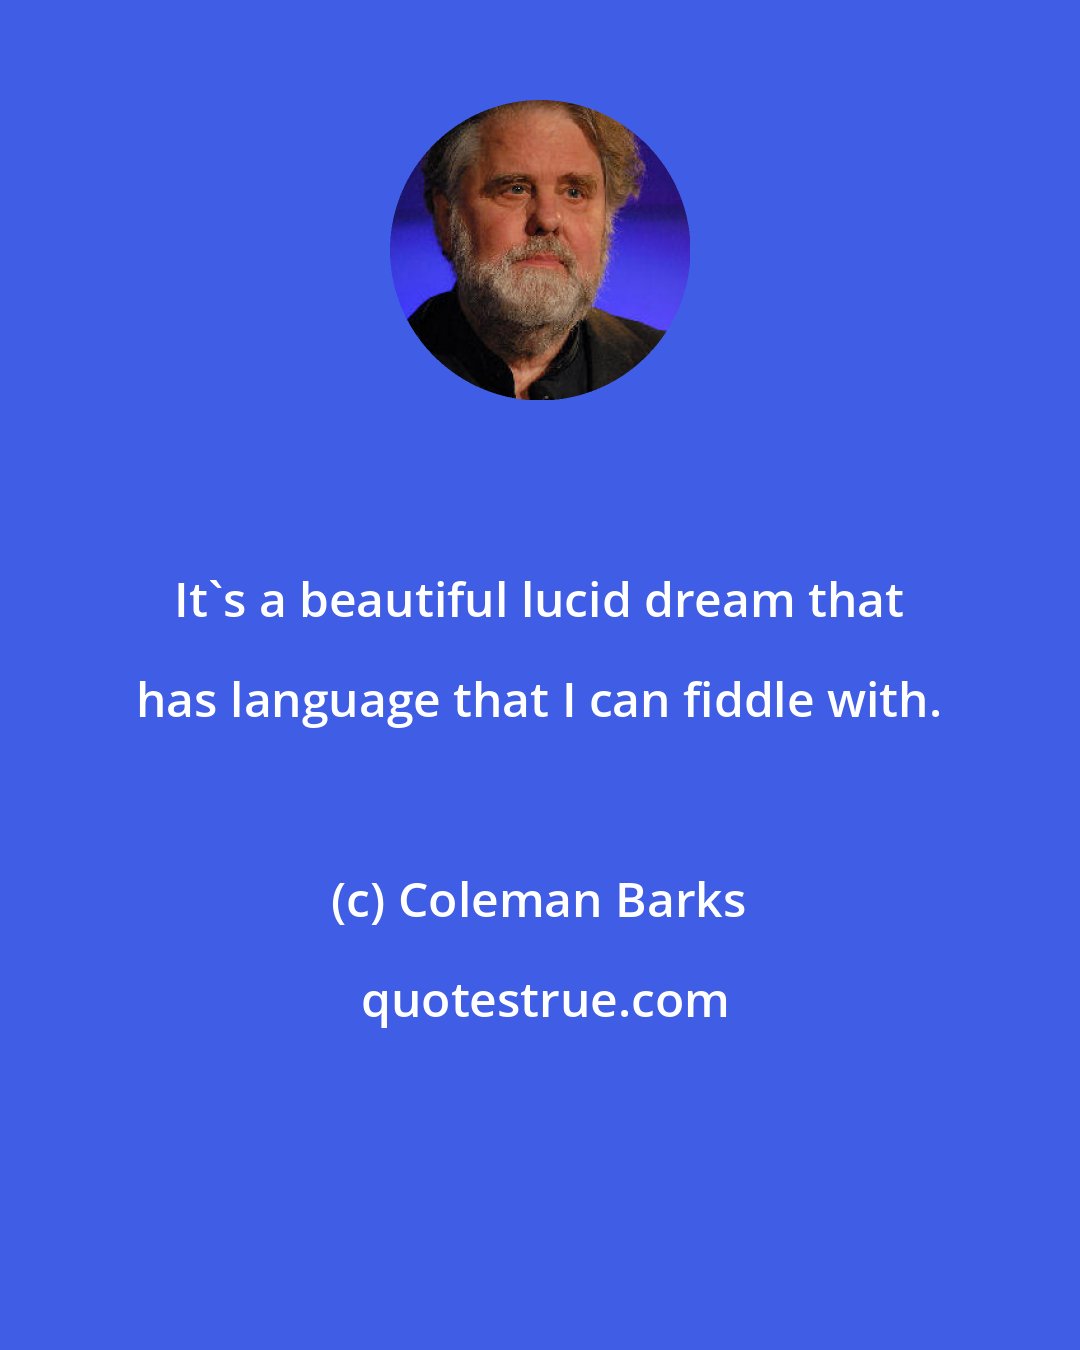 Coleman Barks: It's a beautiful lucid dream that has language that I can fiddle with.